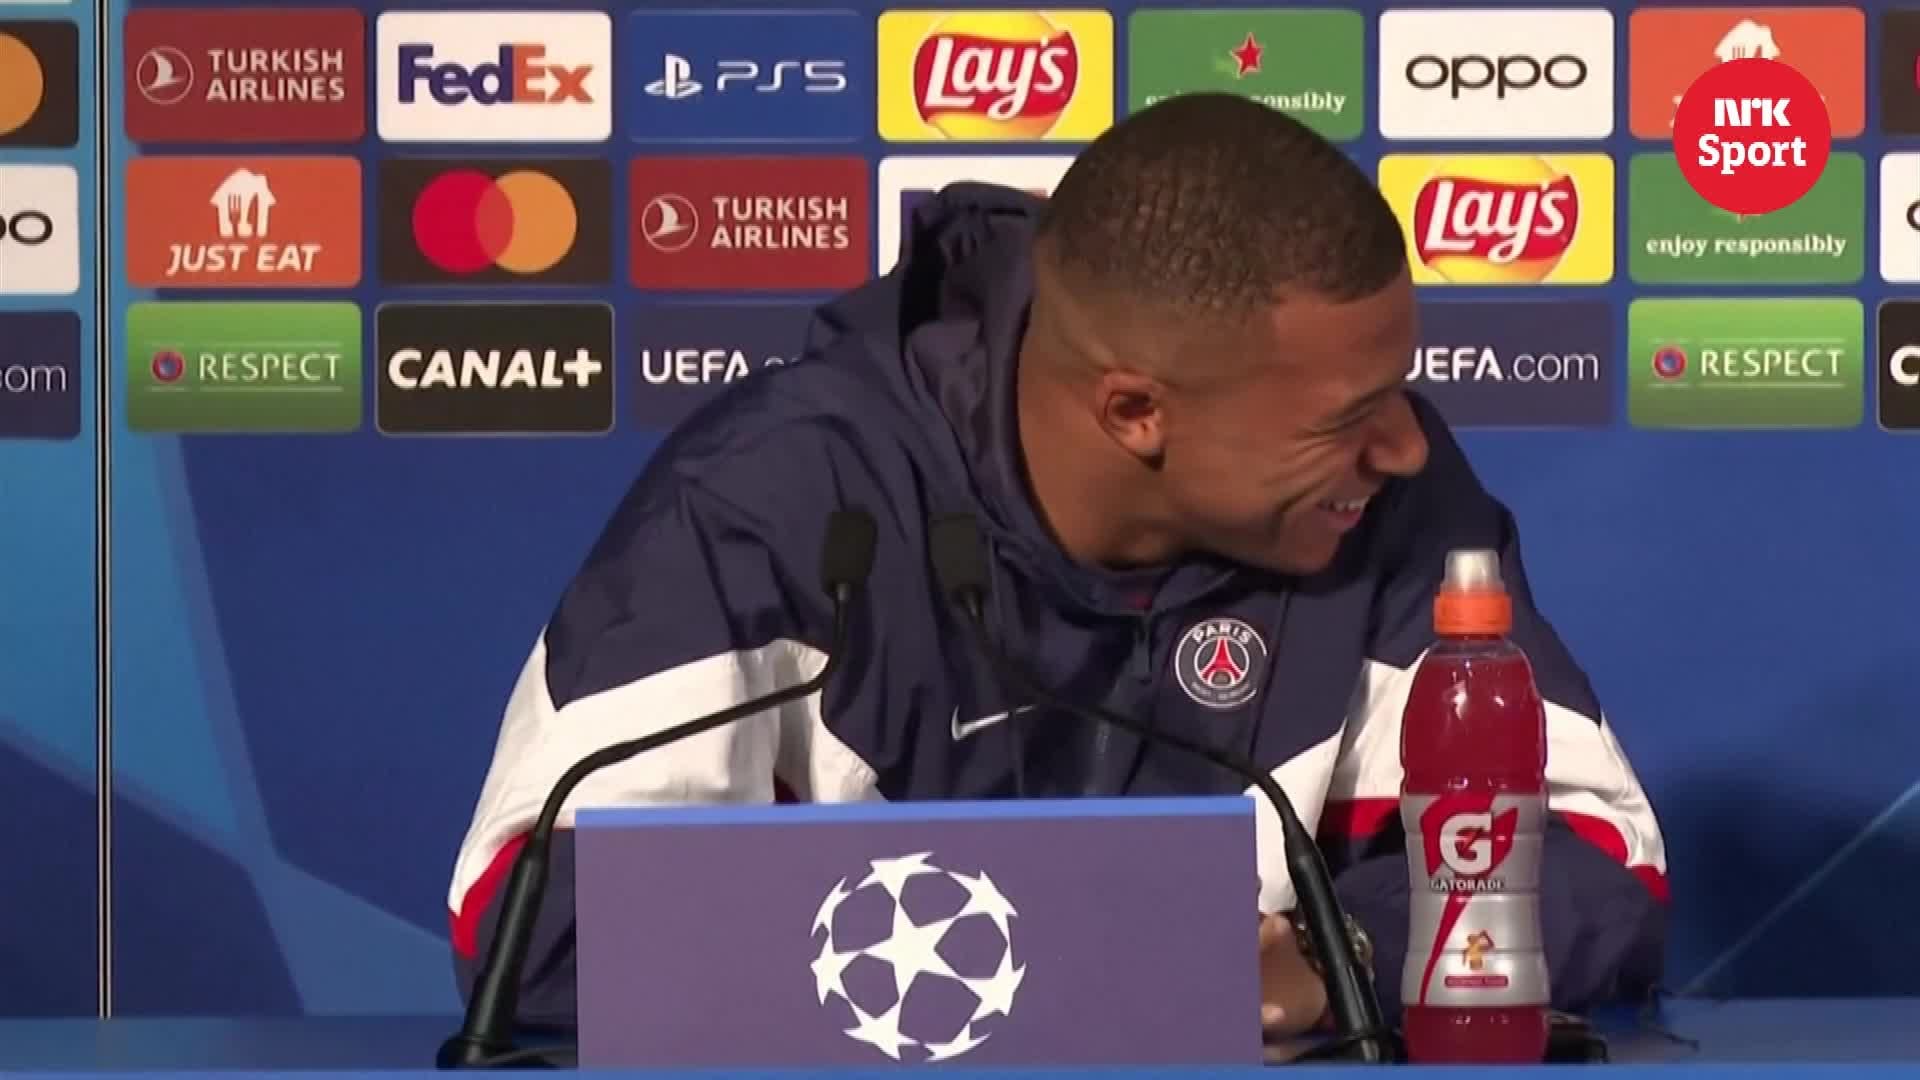 PSG star Kylian Mbappé receives climate criticism after bursting into laughter – NRK Sport – Sports news, results and broadcast schedules